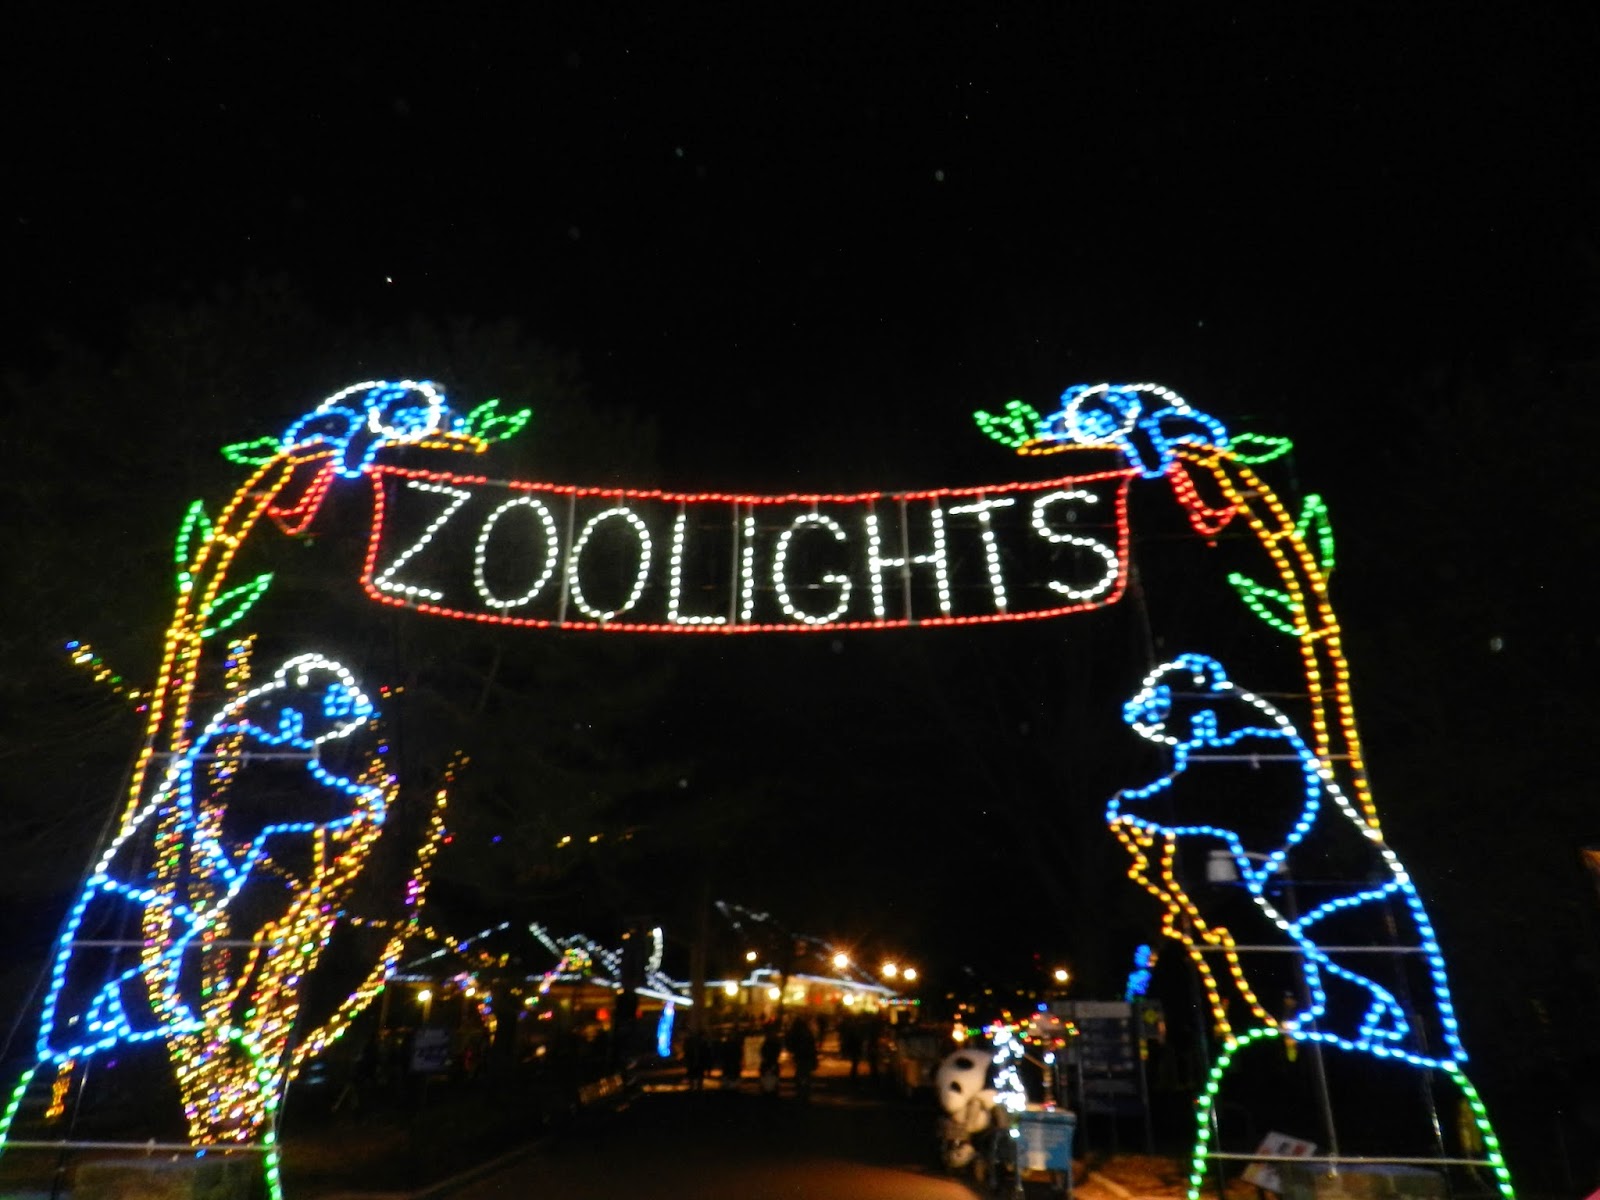 The Real Housewife of DC Zoo Lights at the National Zoo